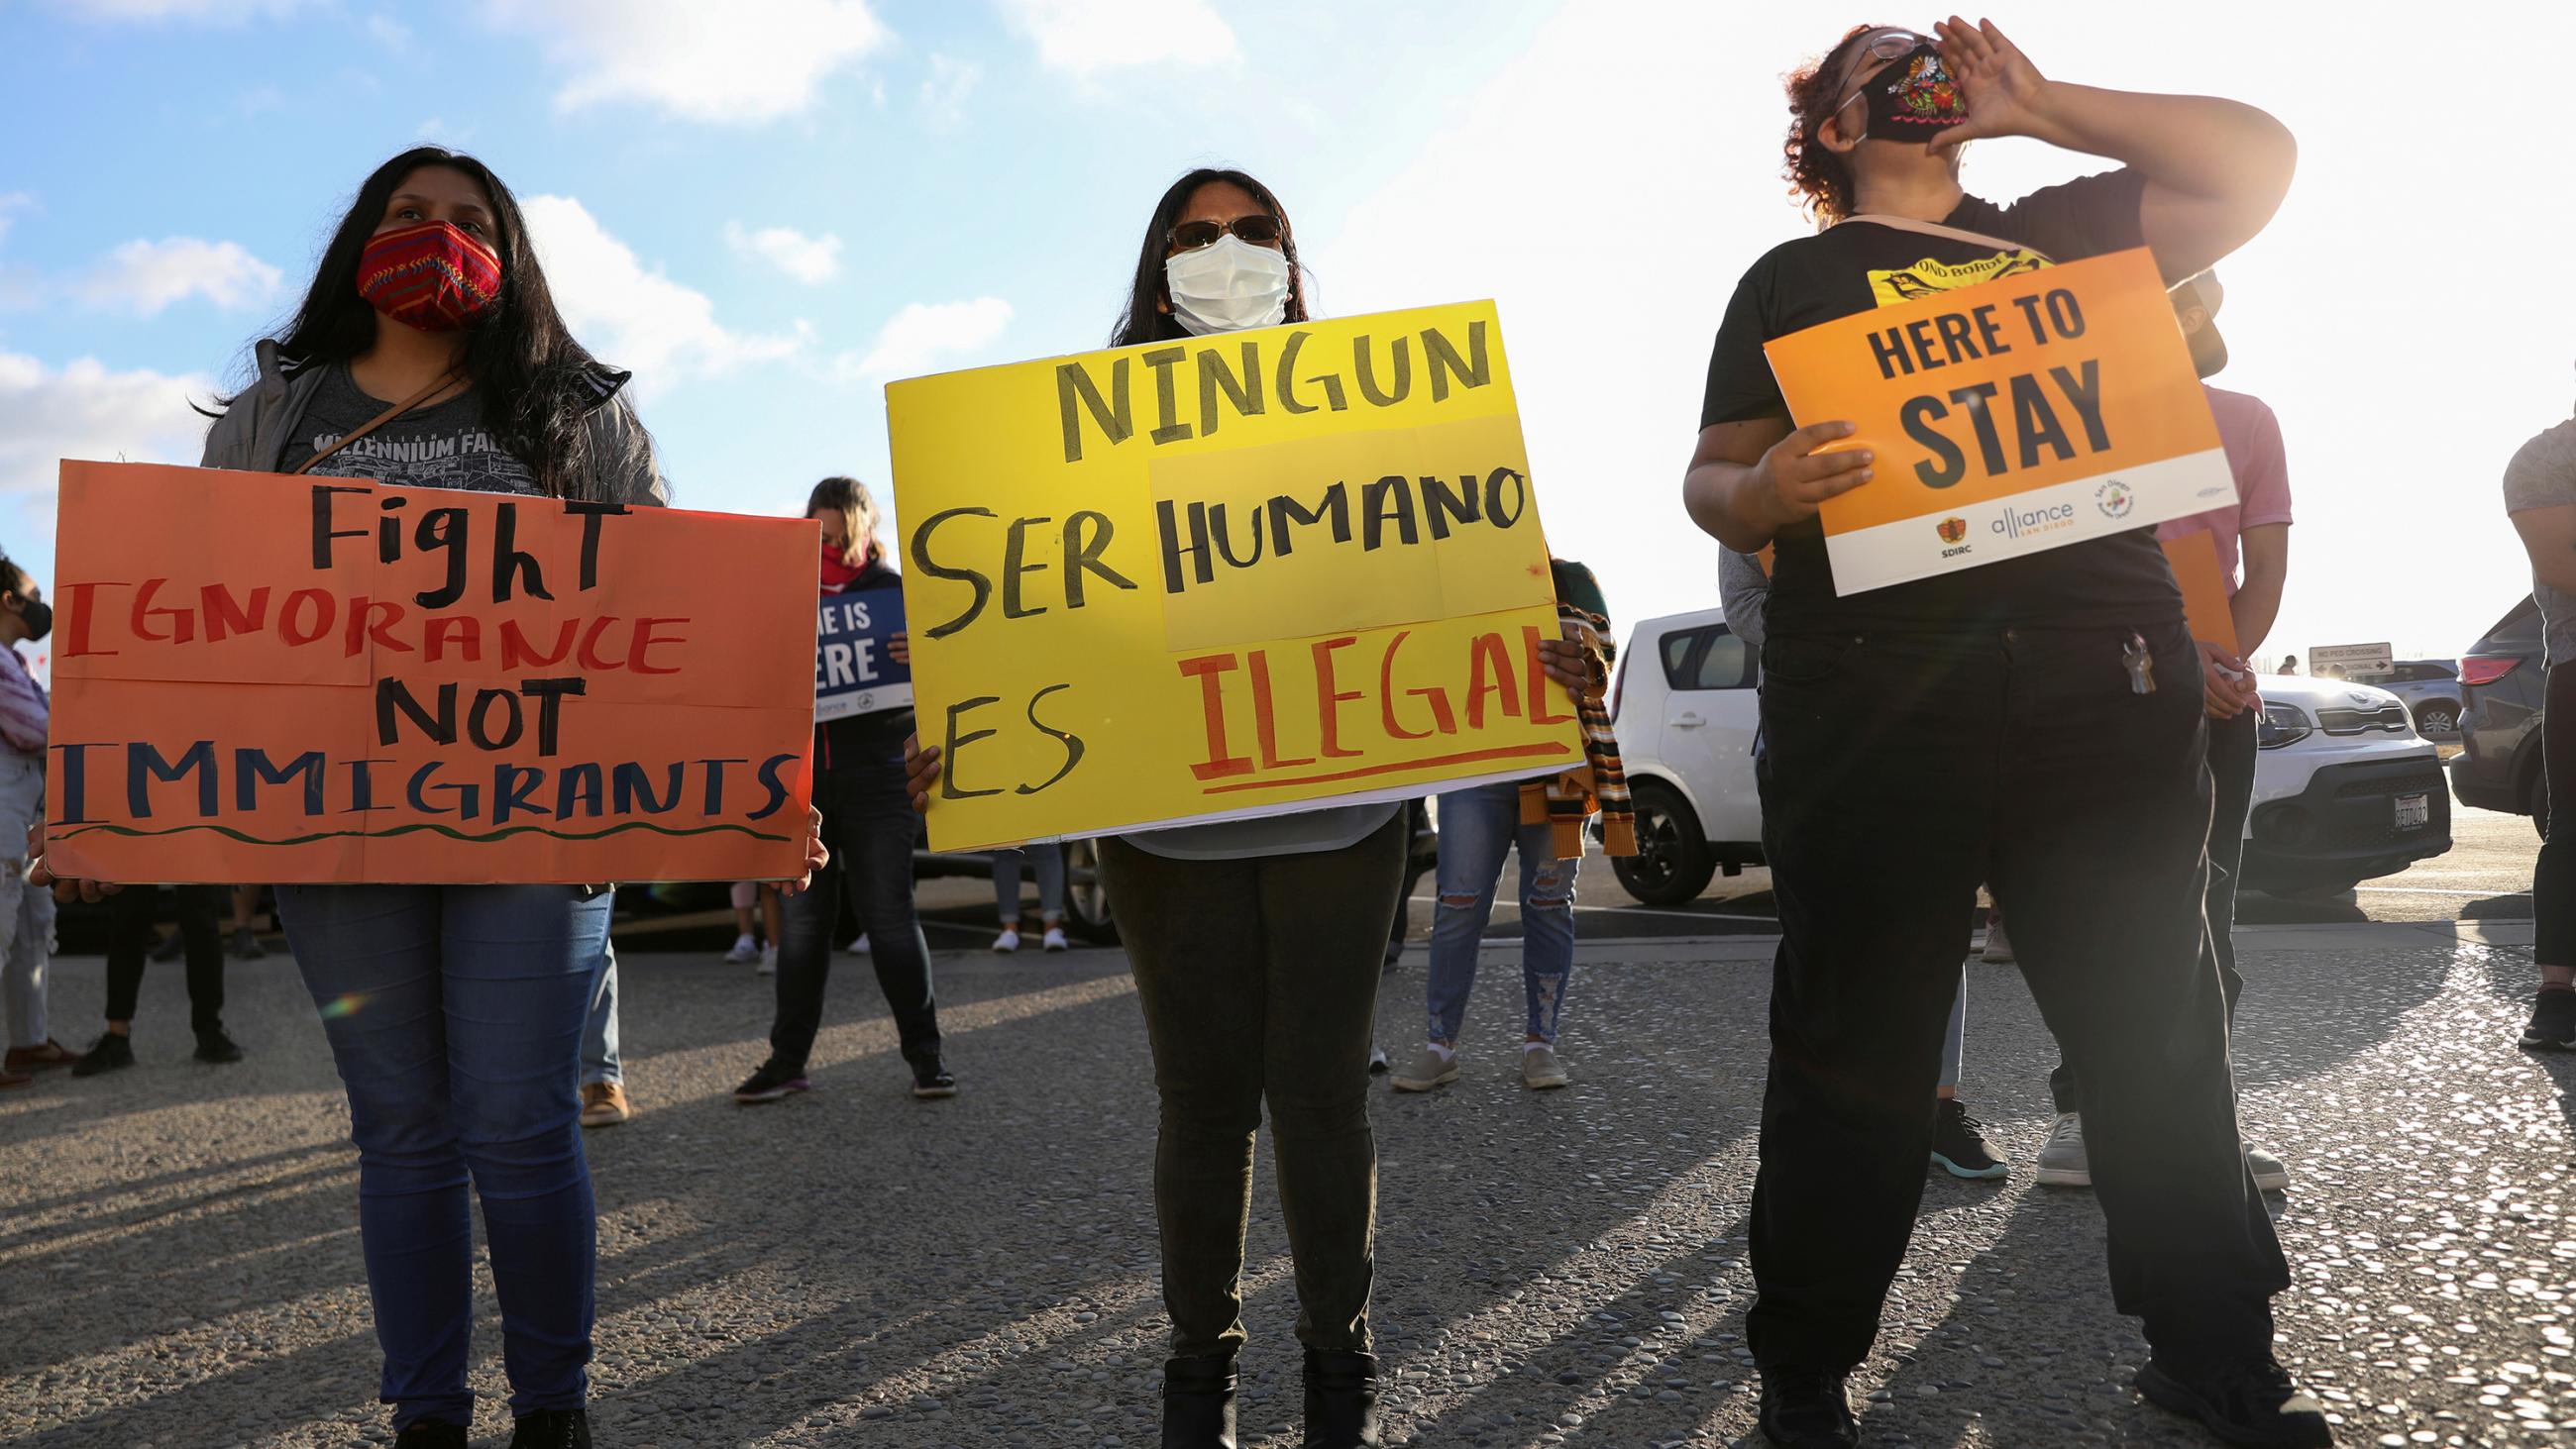 The photo shows three people holding handmade signs in a protest. The sign in the middle reads: "No human being is illegal." 